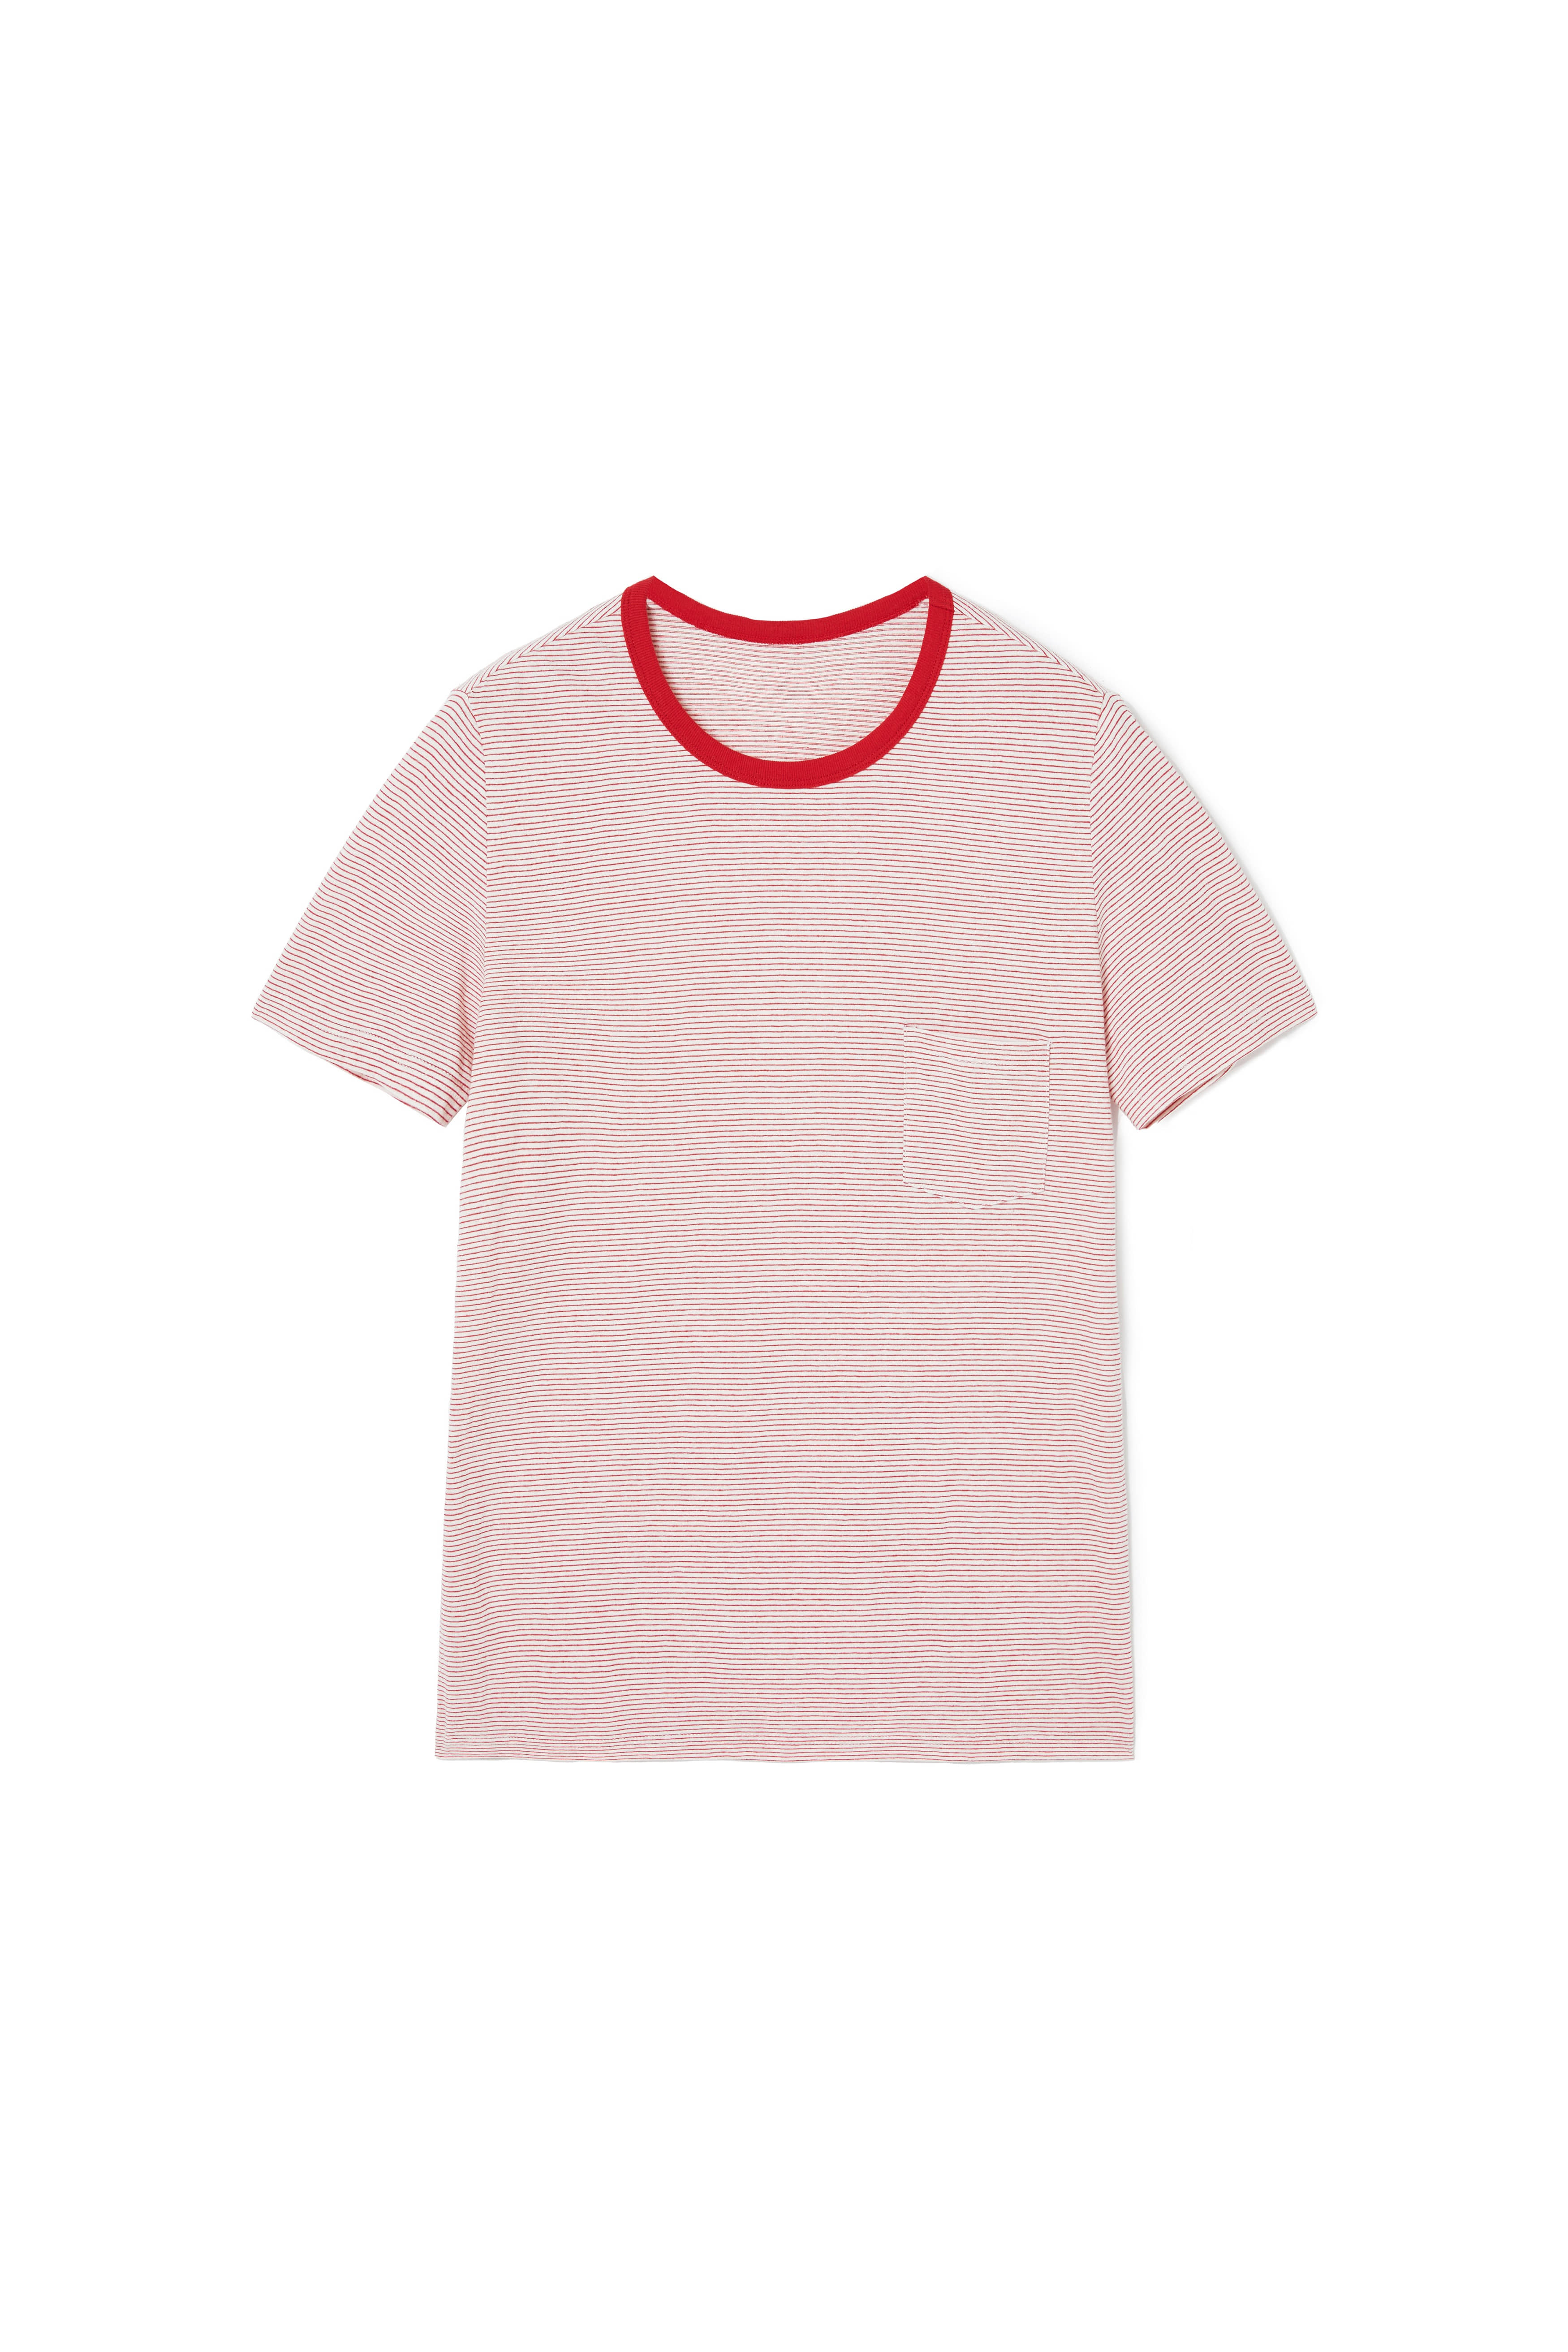 CIRCUSFALSE: RINGER T-SHIRTS IN RED STRIPE